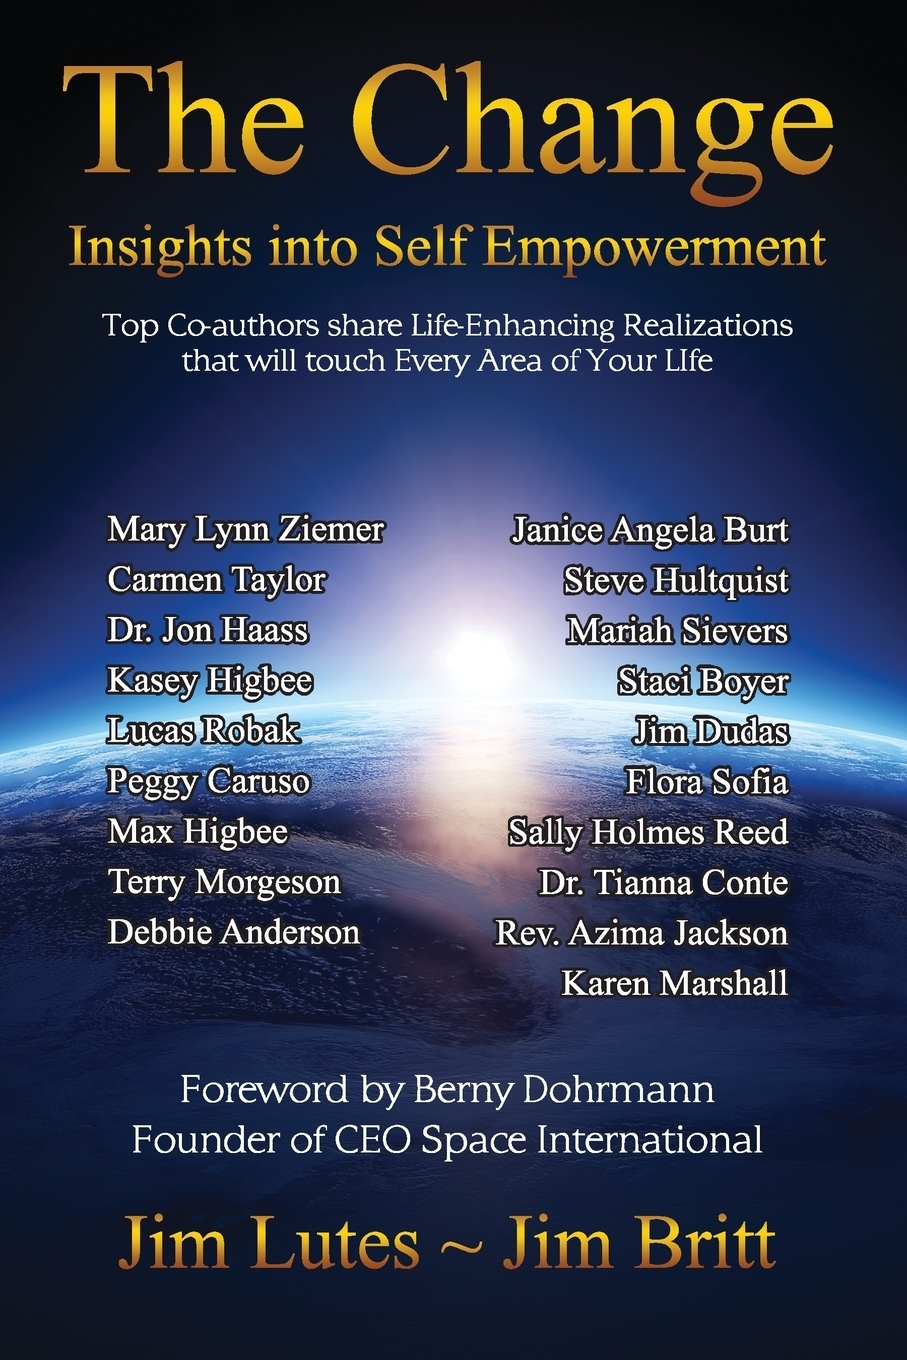 The Change: Insights Into Self Empowerment